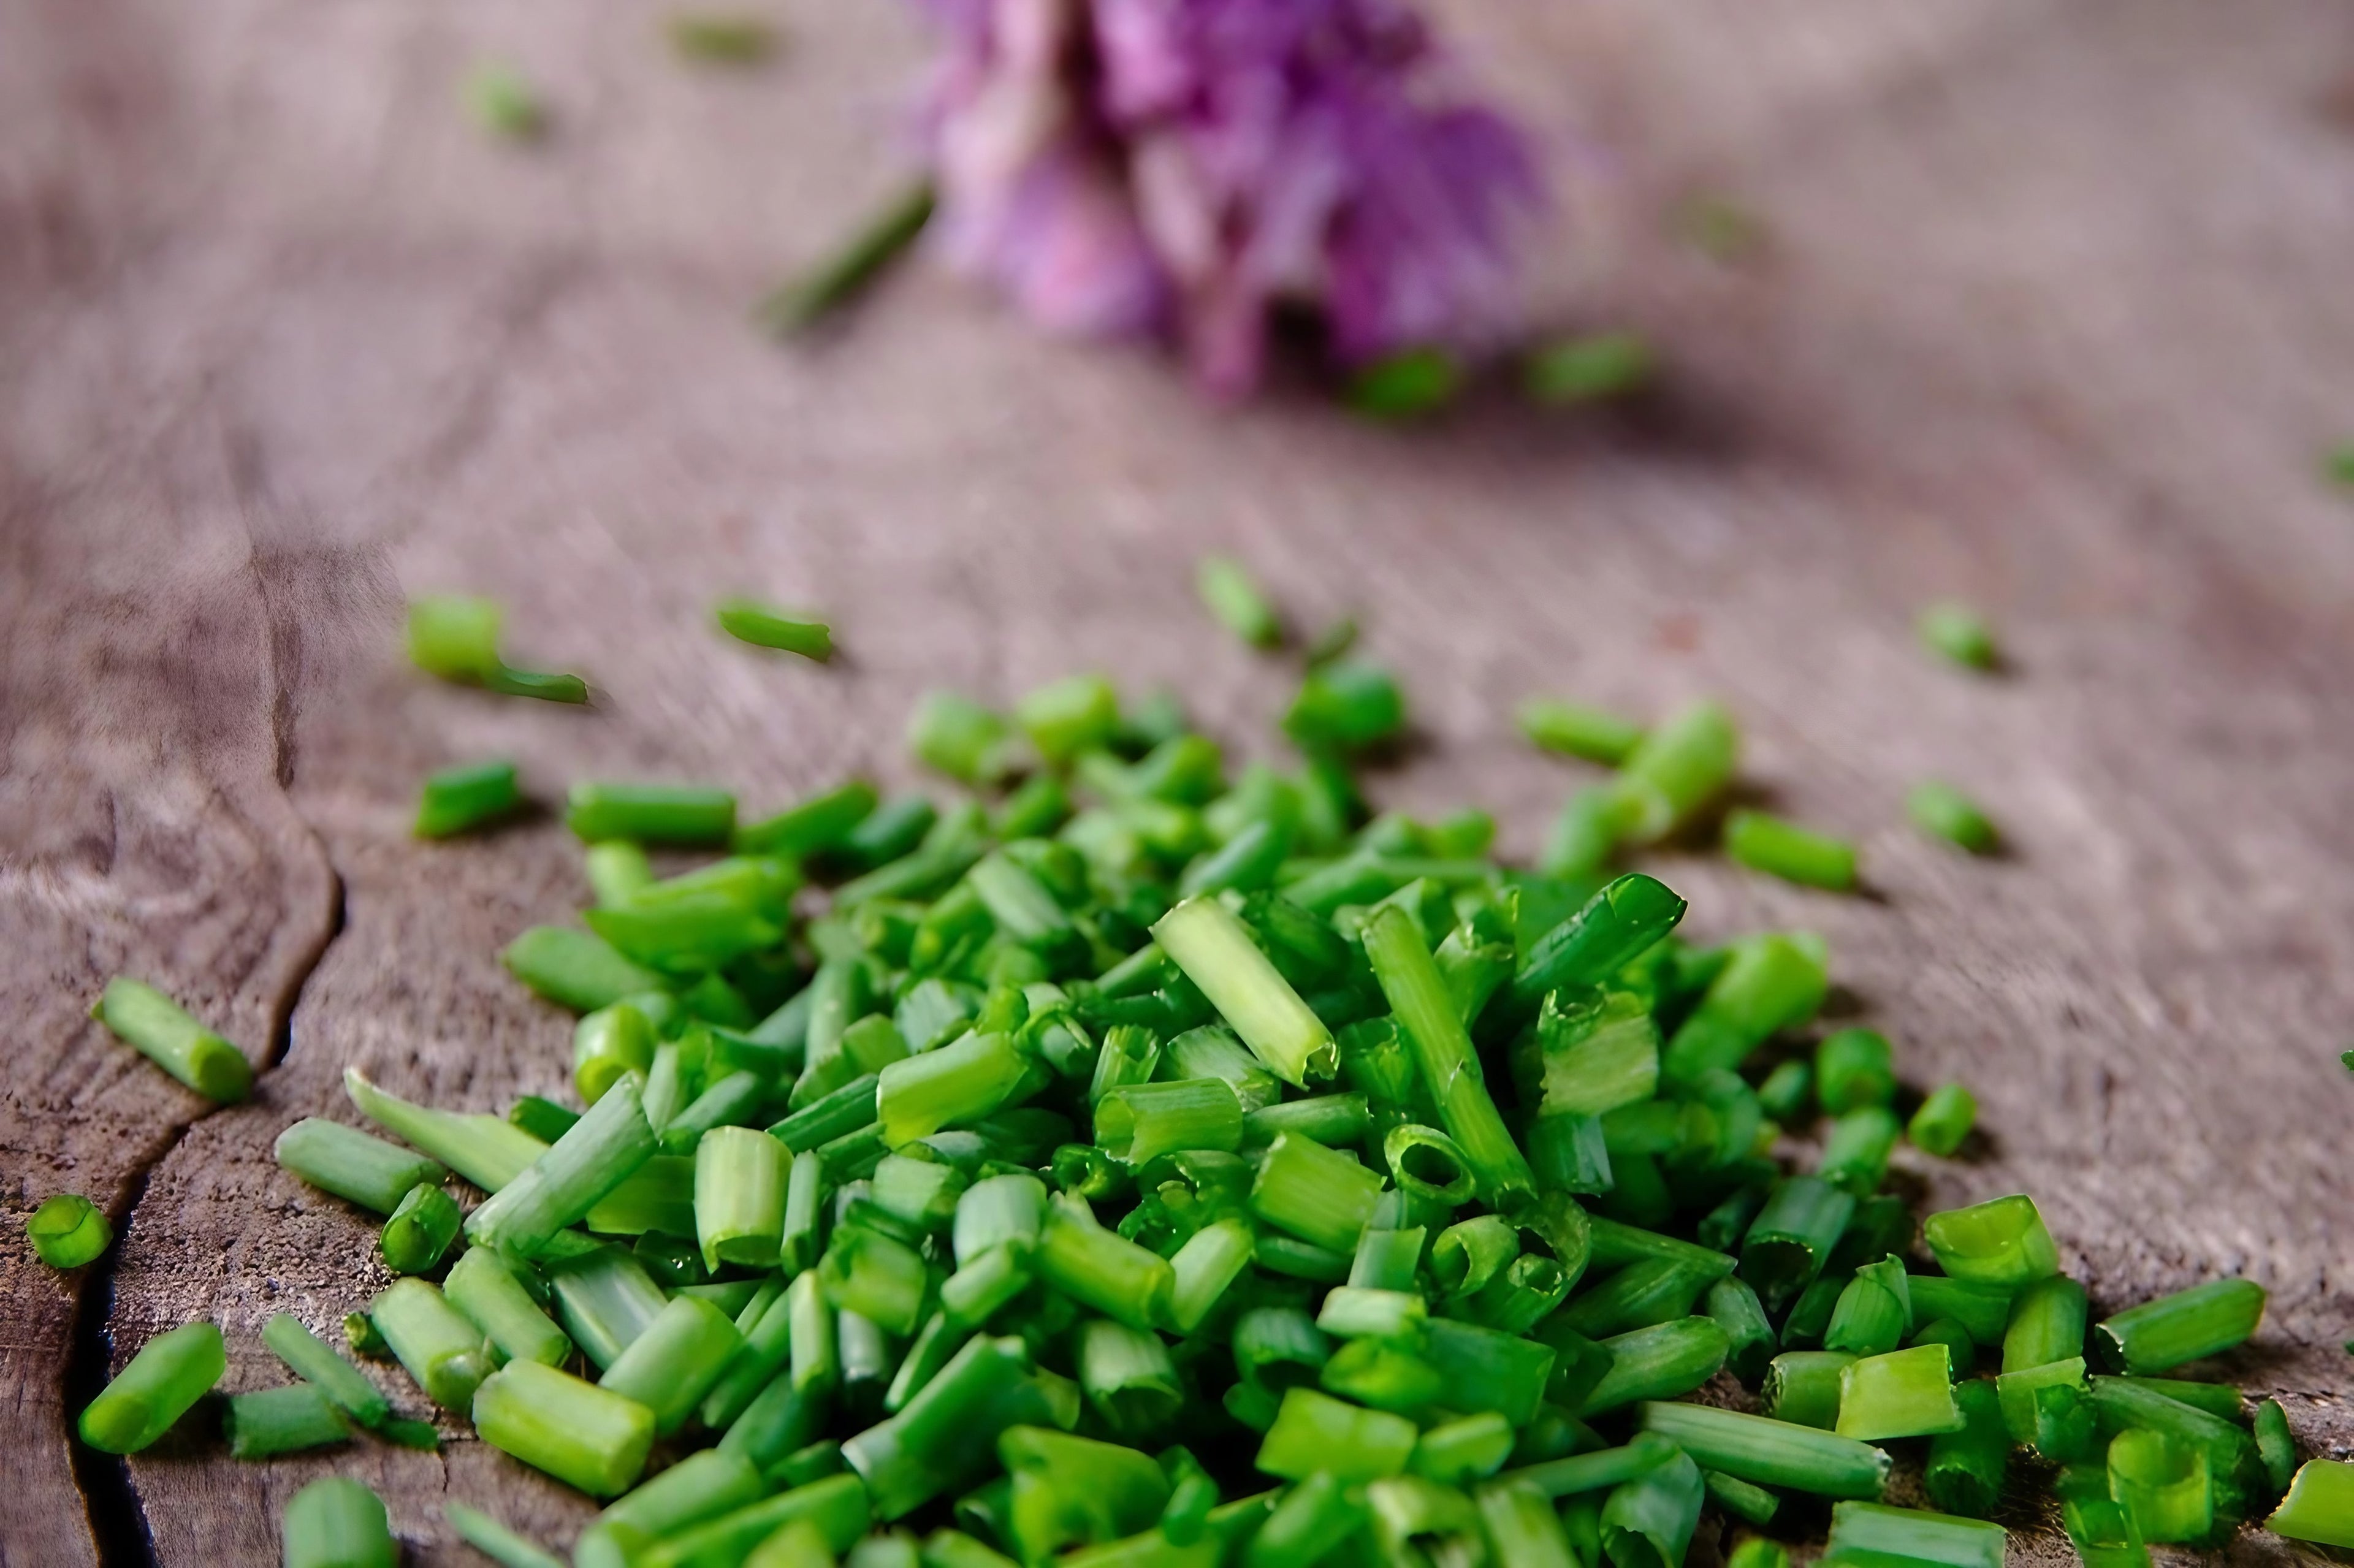 Chopped chives spread on a rustic wooden surface